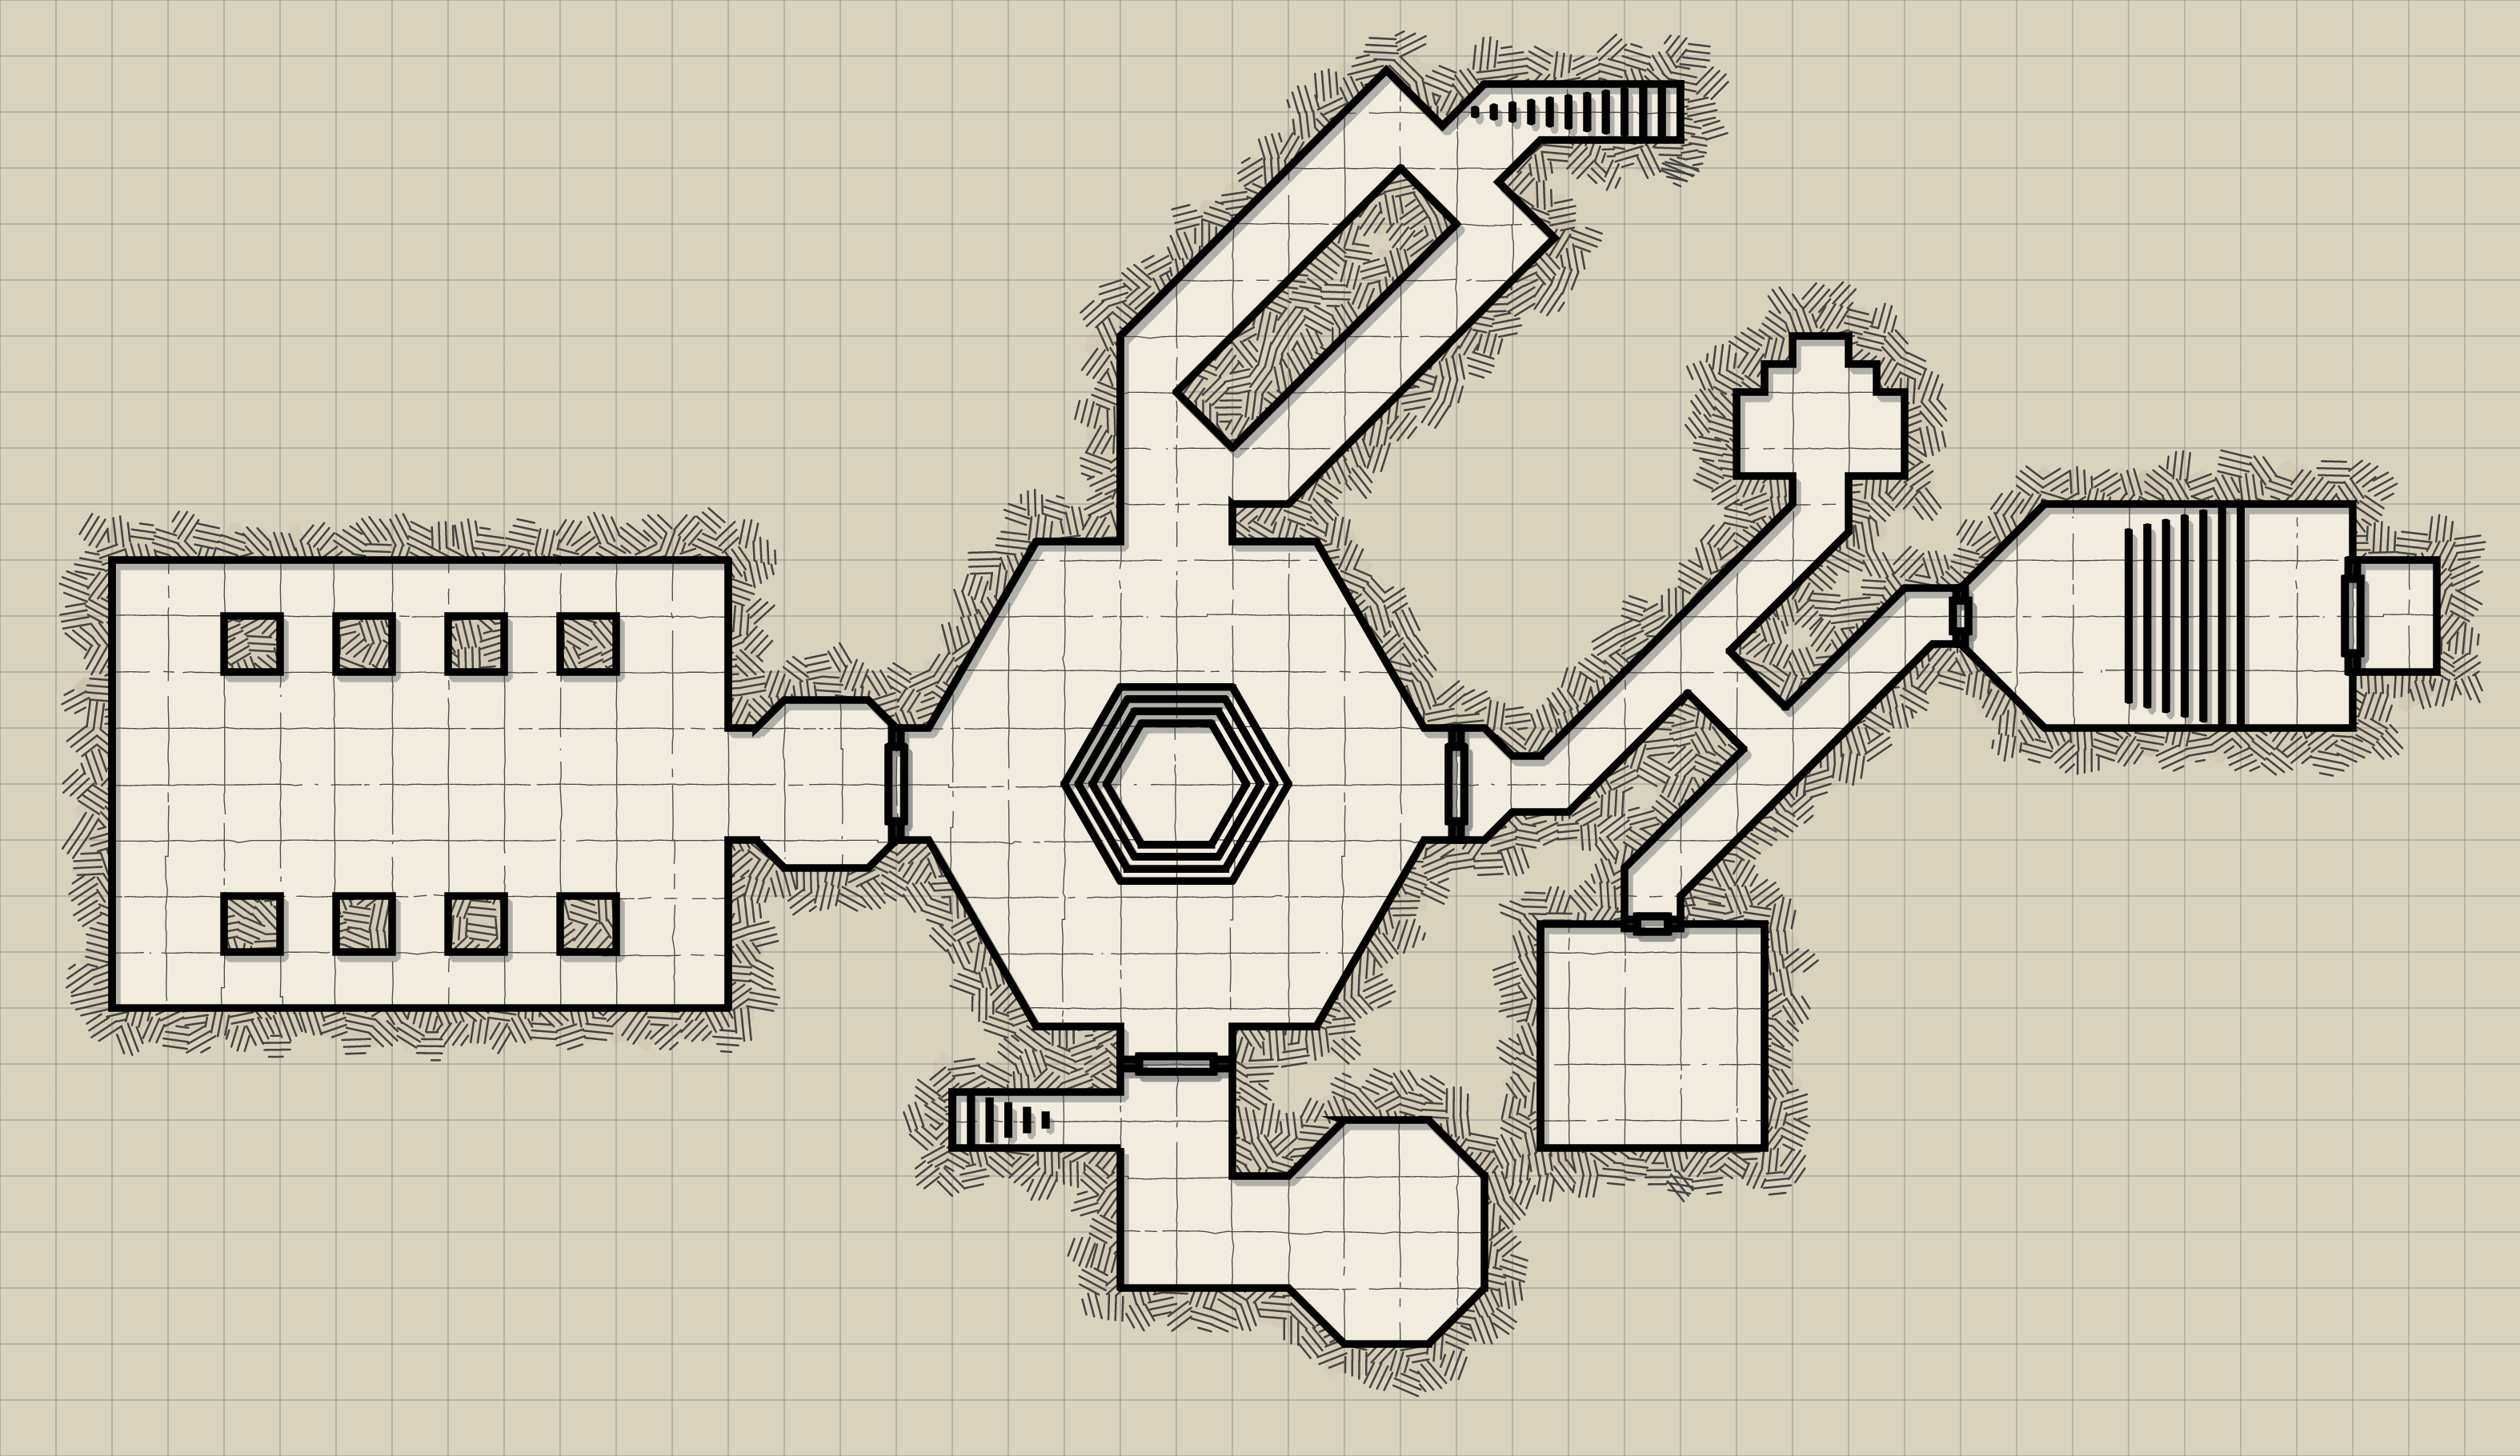 Final version of the dungeon map